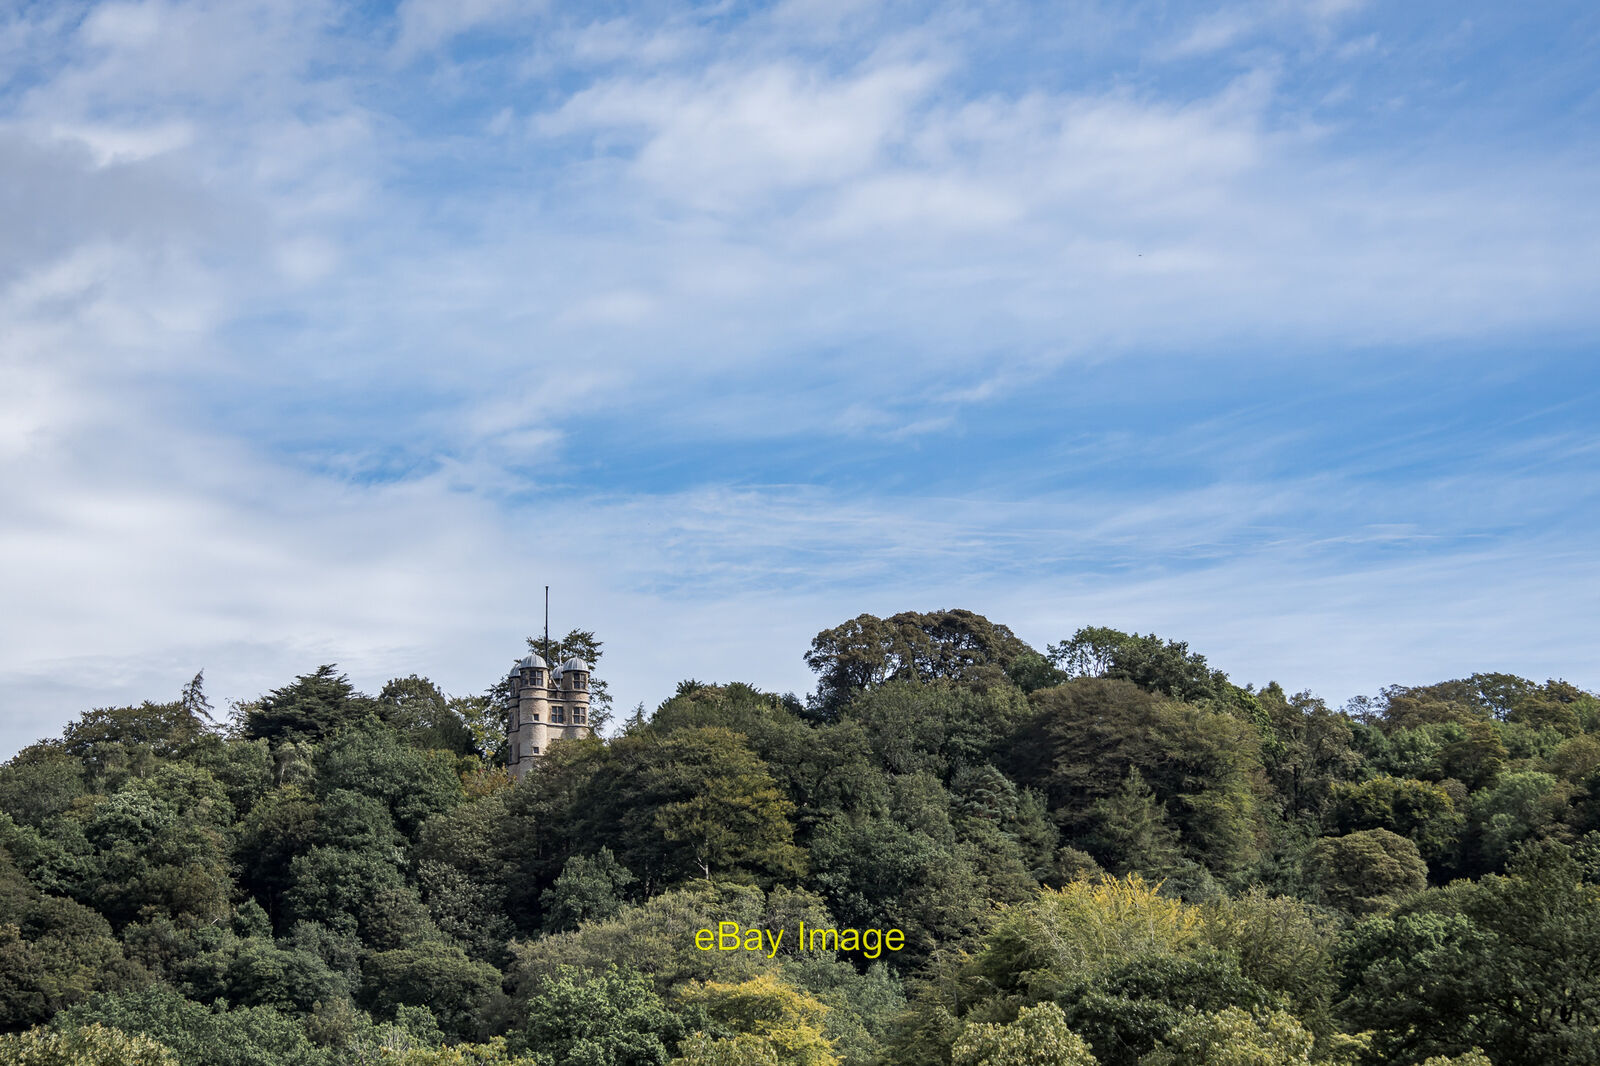 Photo 6x4 Hunting Tower, Chatsworth House Edensor On the hills of the eas c2019